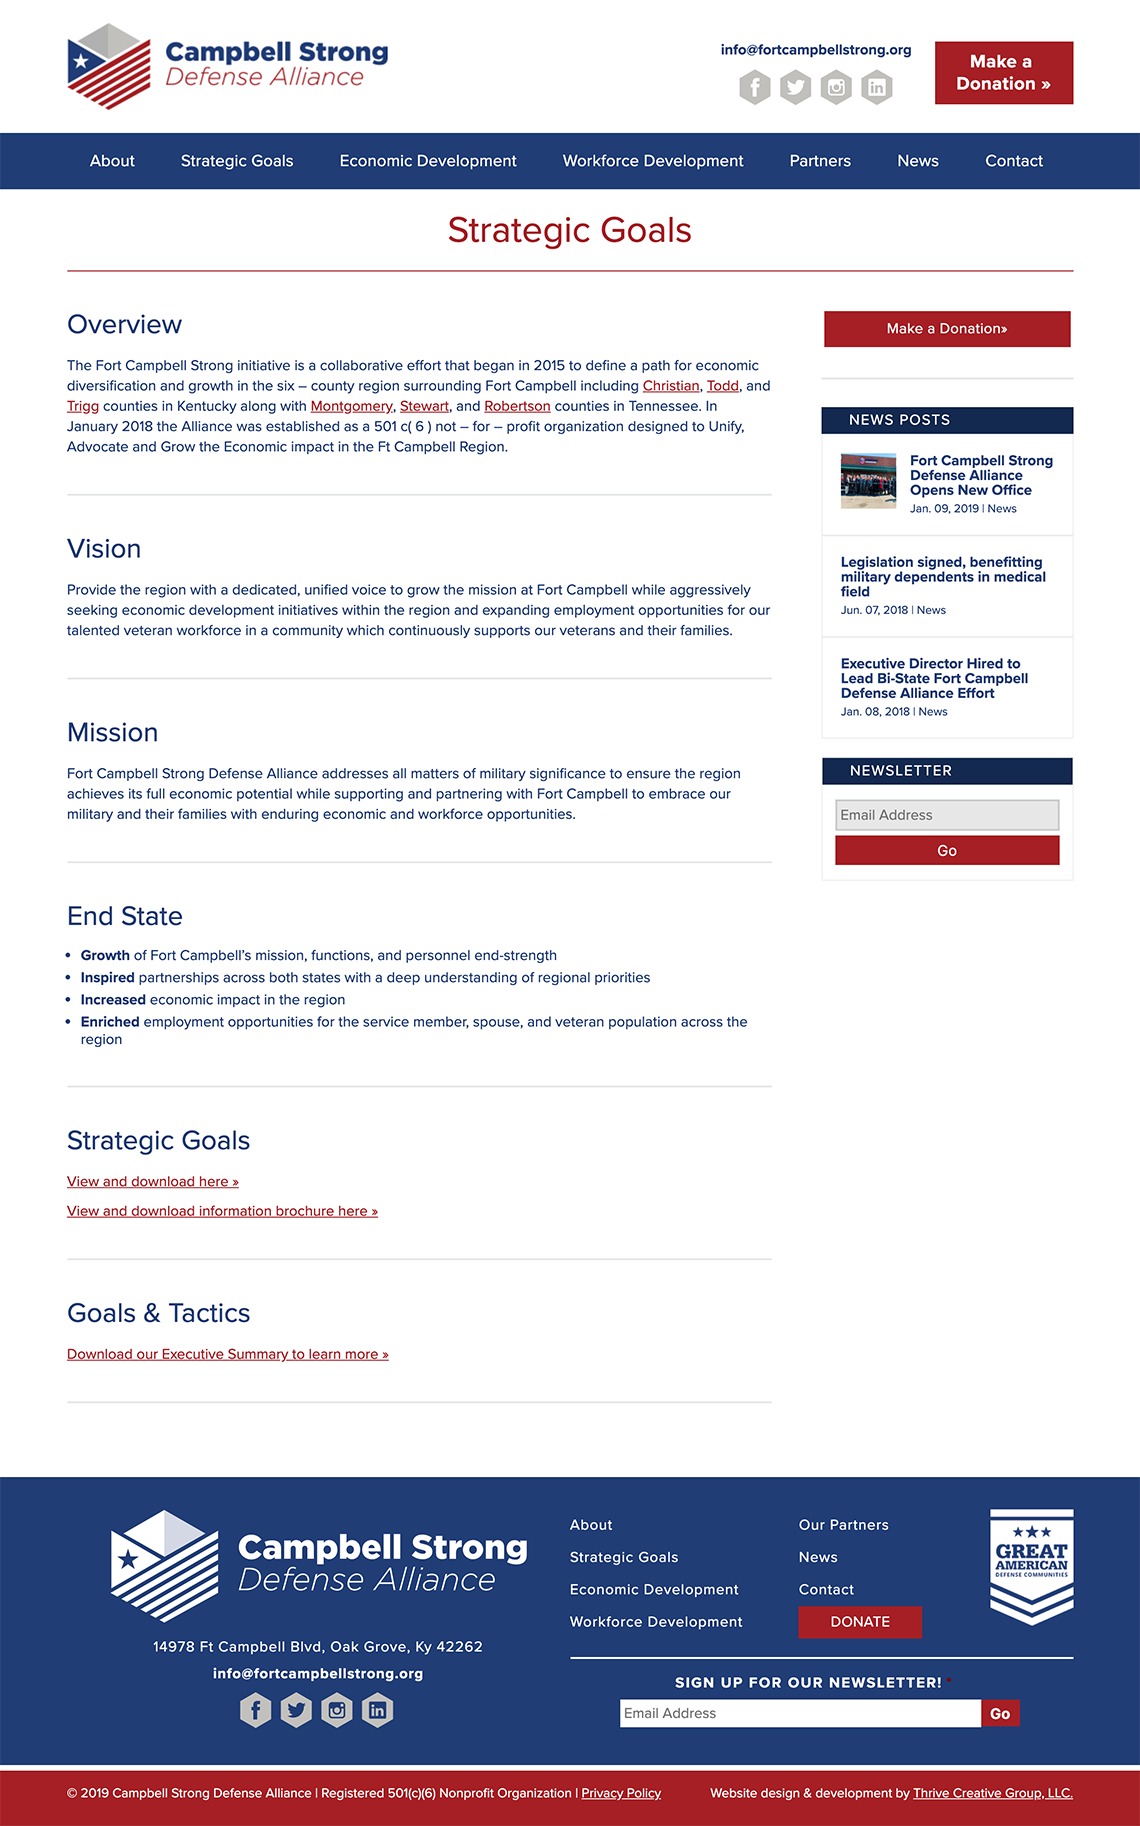 Campbell Strong Defense Alliance Web Design Interior Page by Thrive